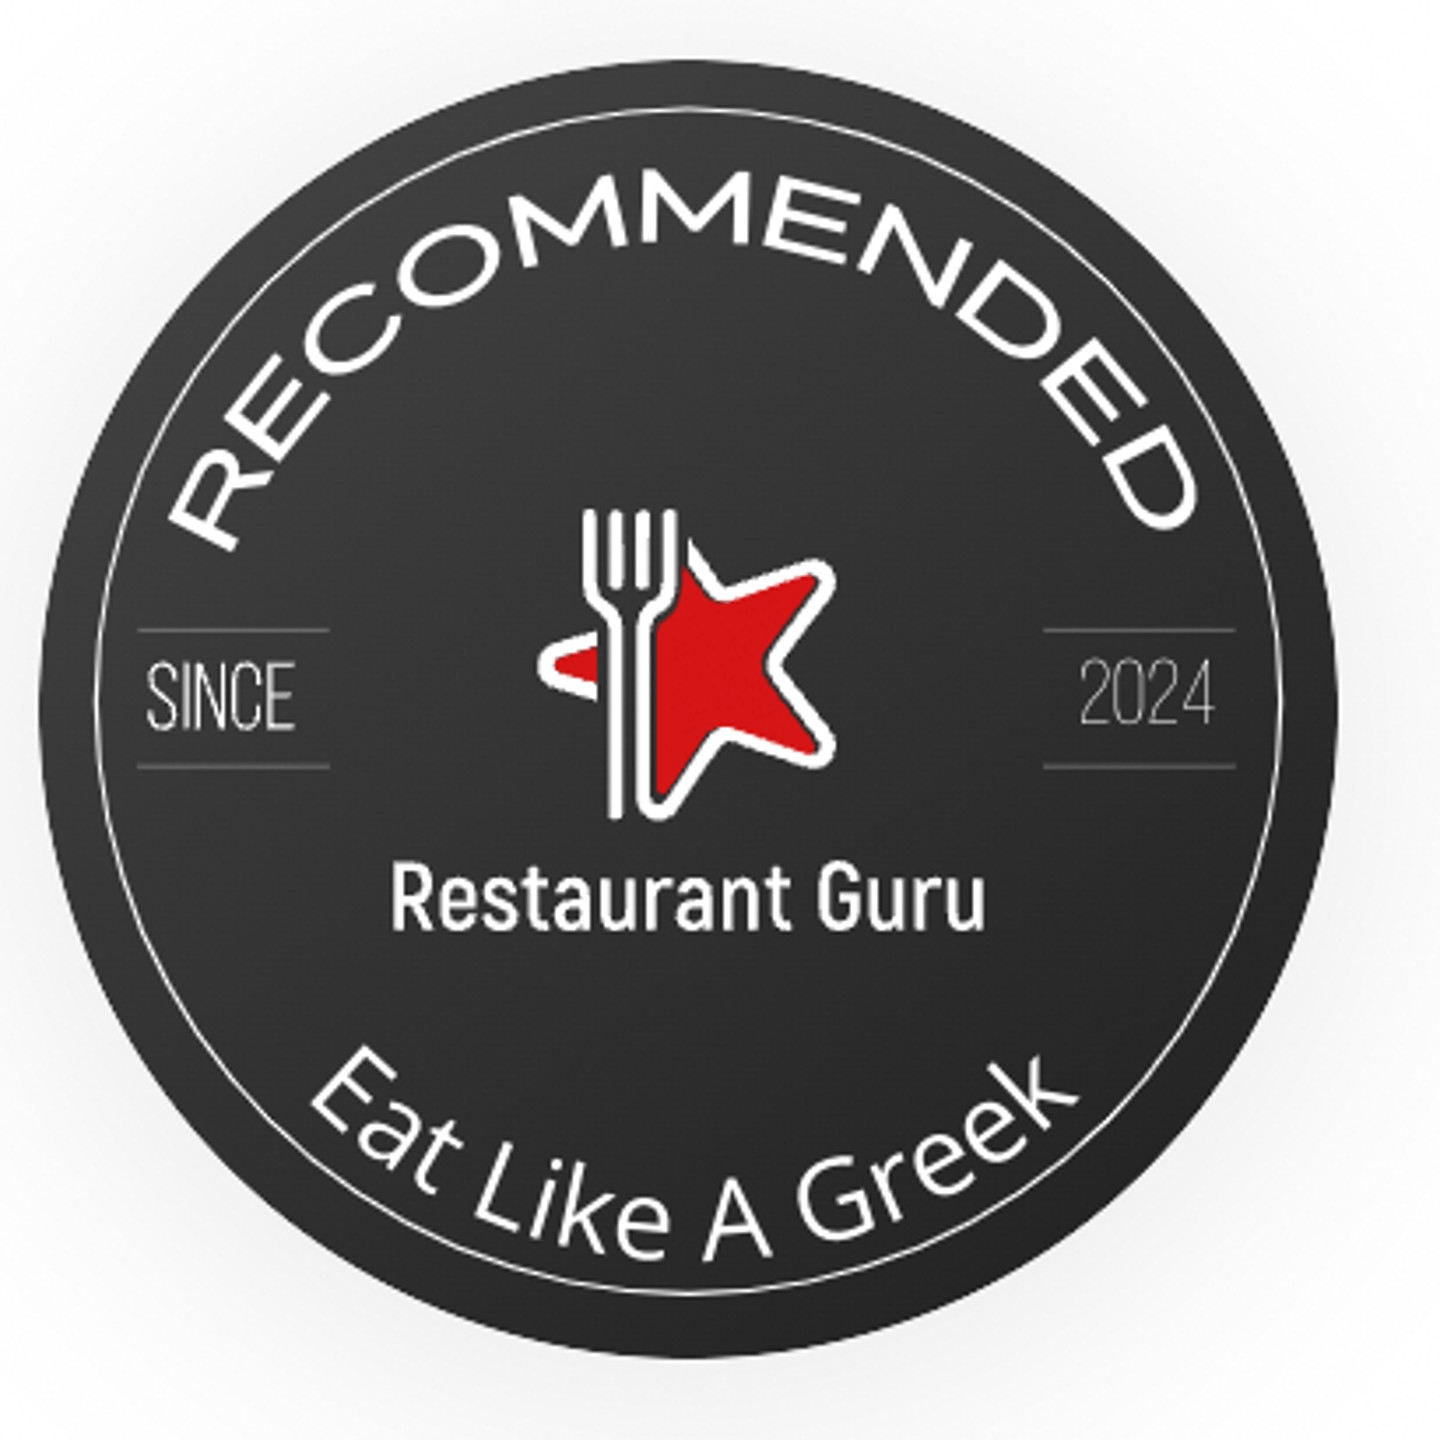 Recommended By Restaurant Guru